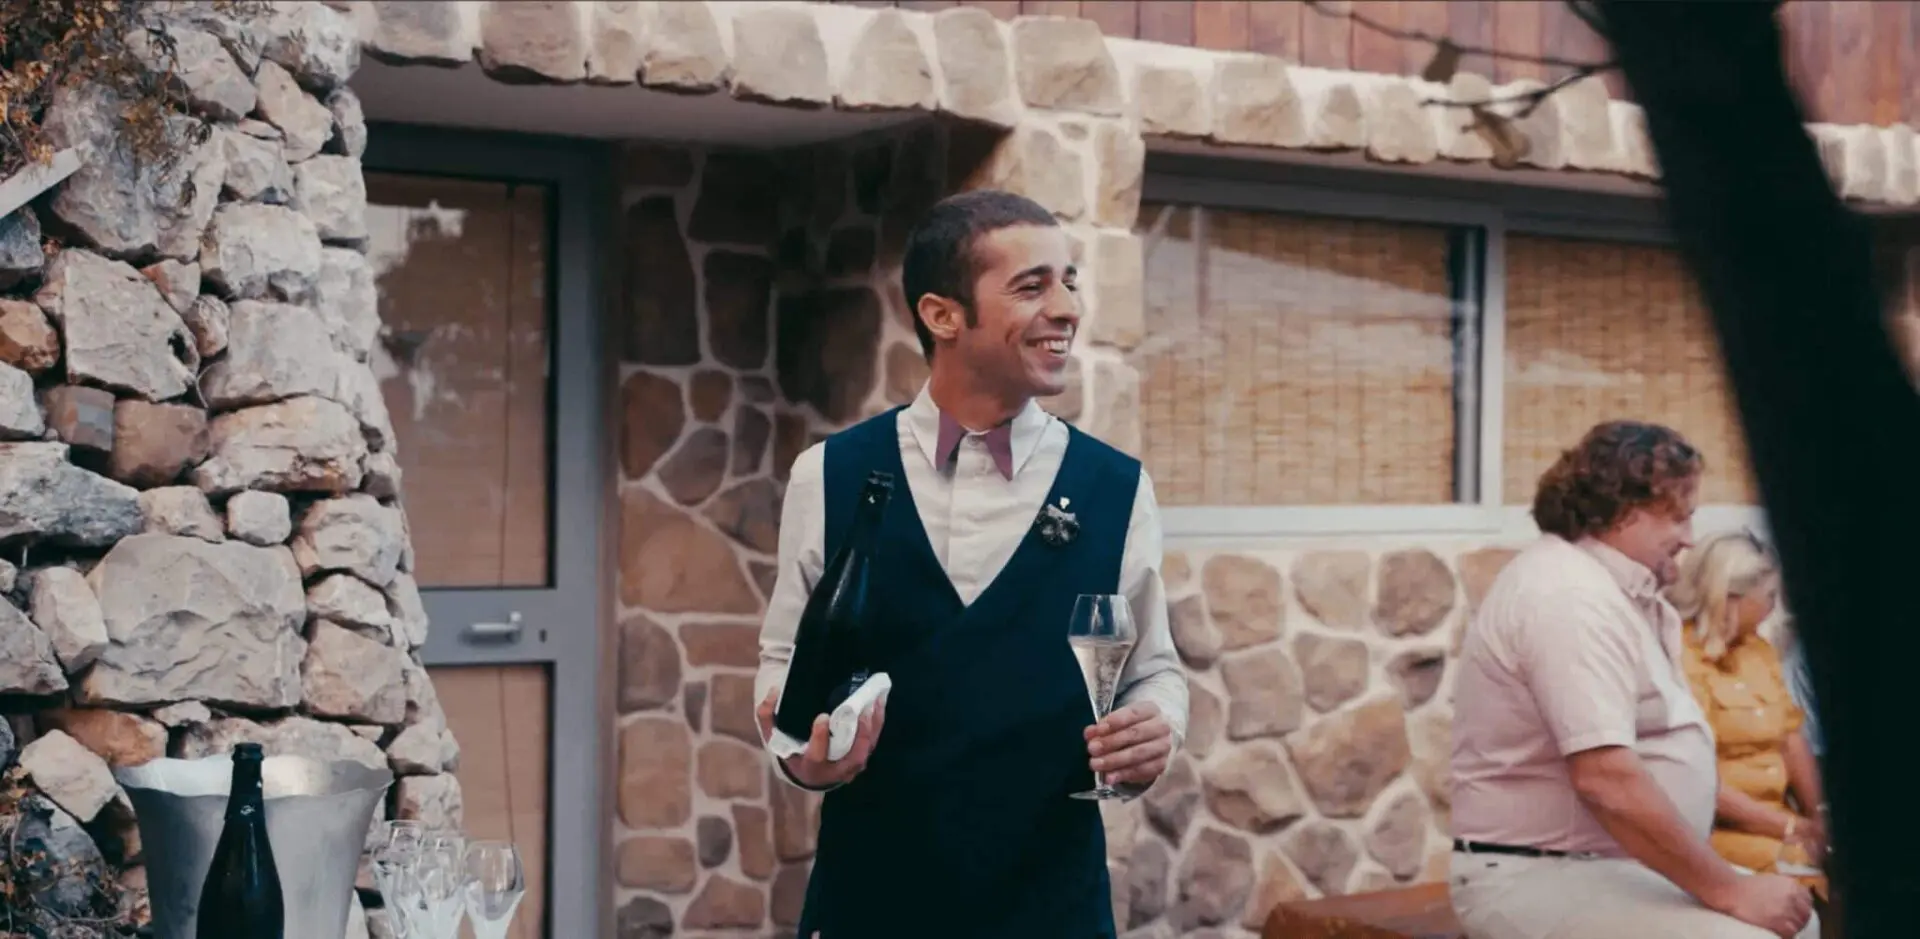 A waiter smiling pouring out a glass of wine